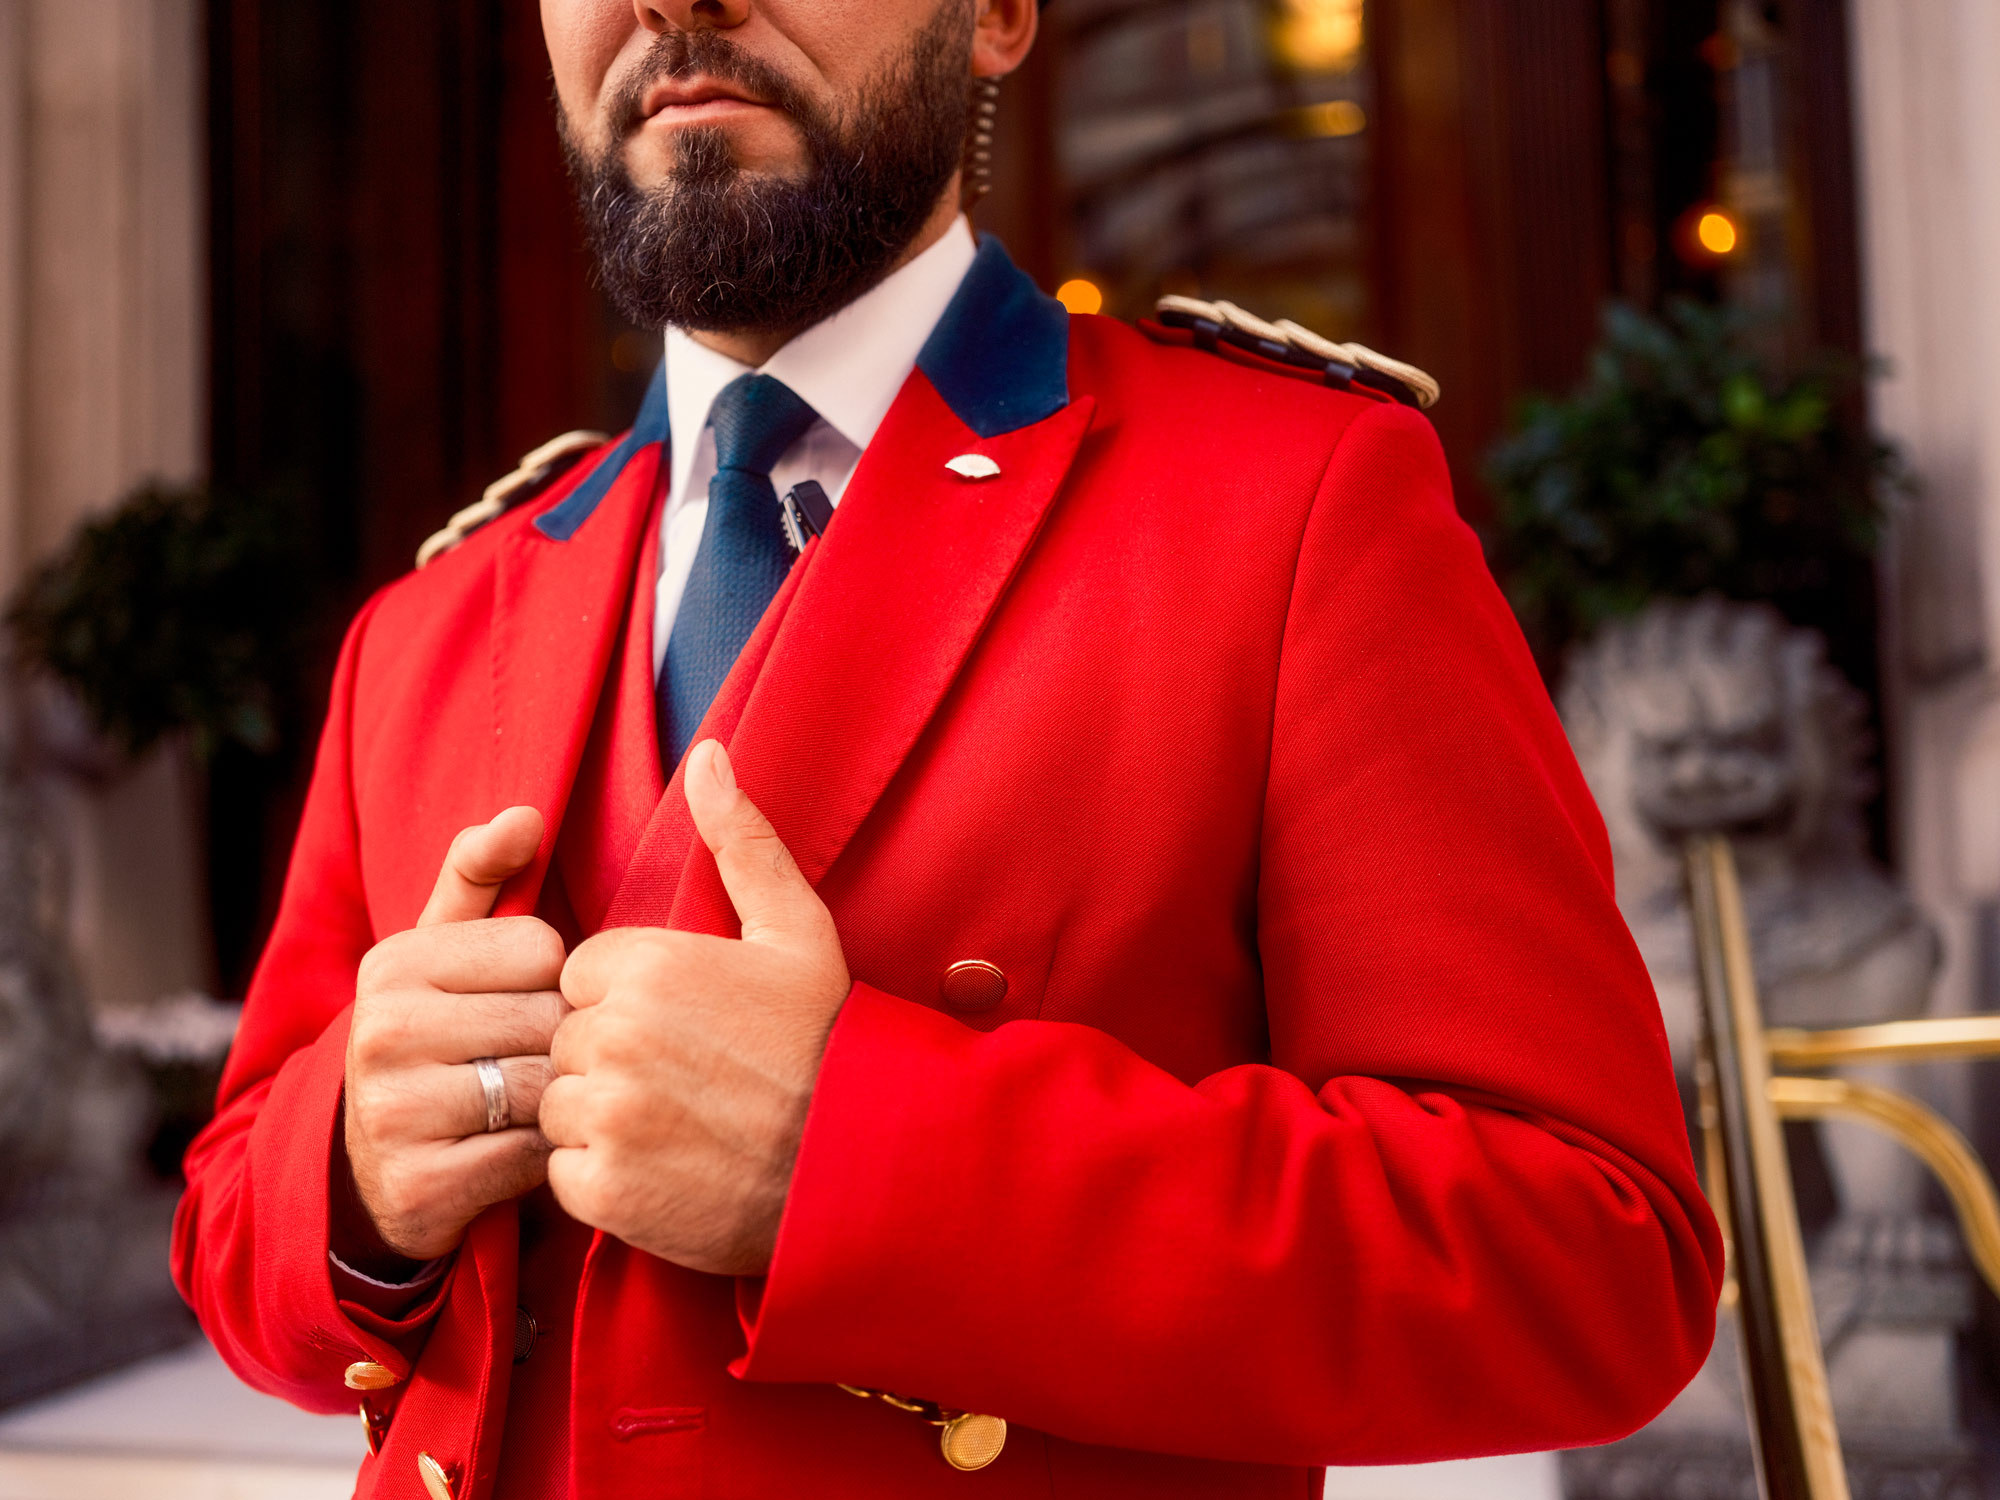 A doorman wearing a bright red jacket and resting his hands in pockets.